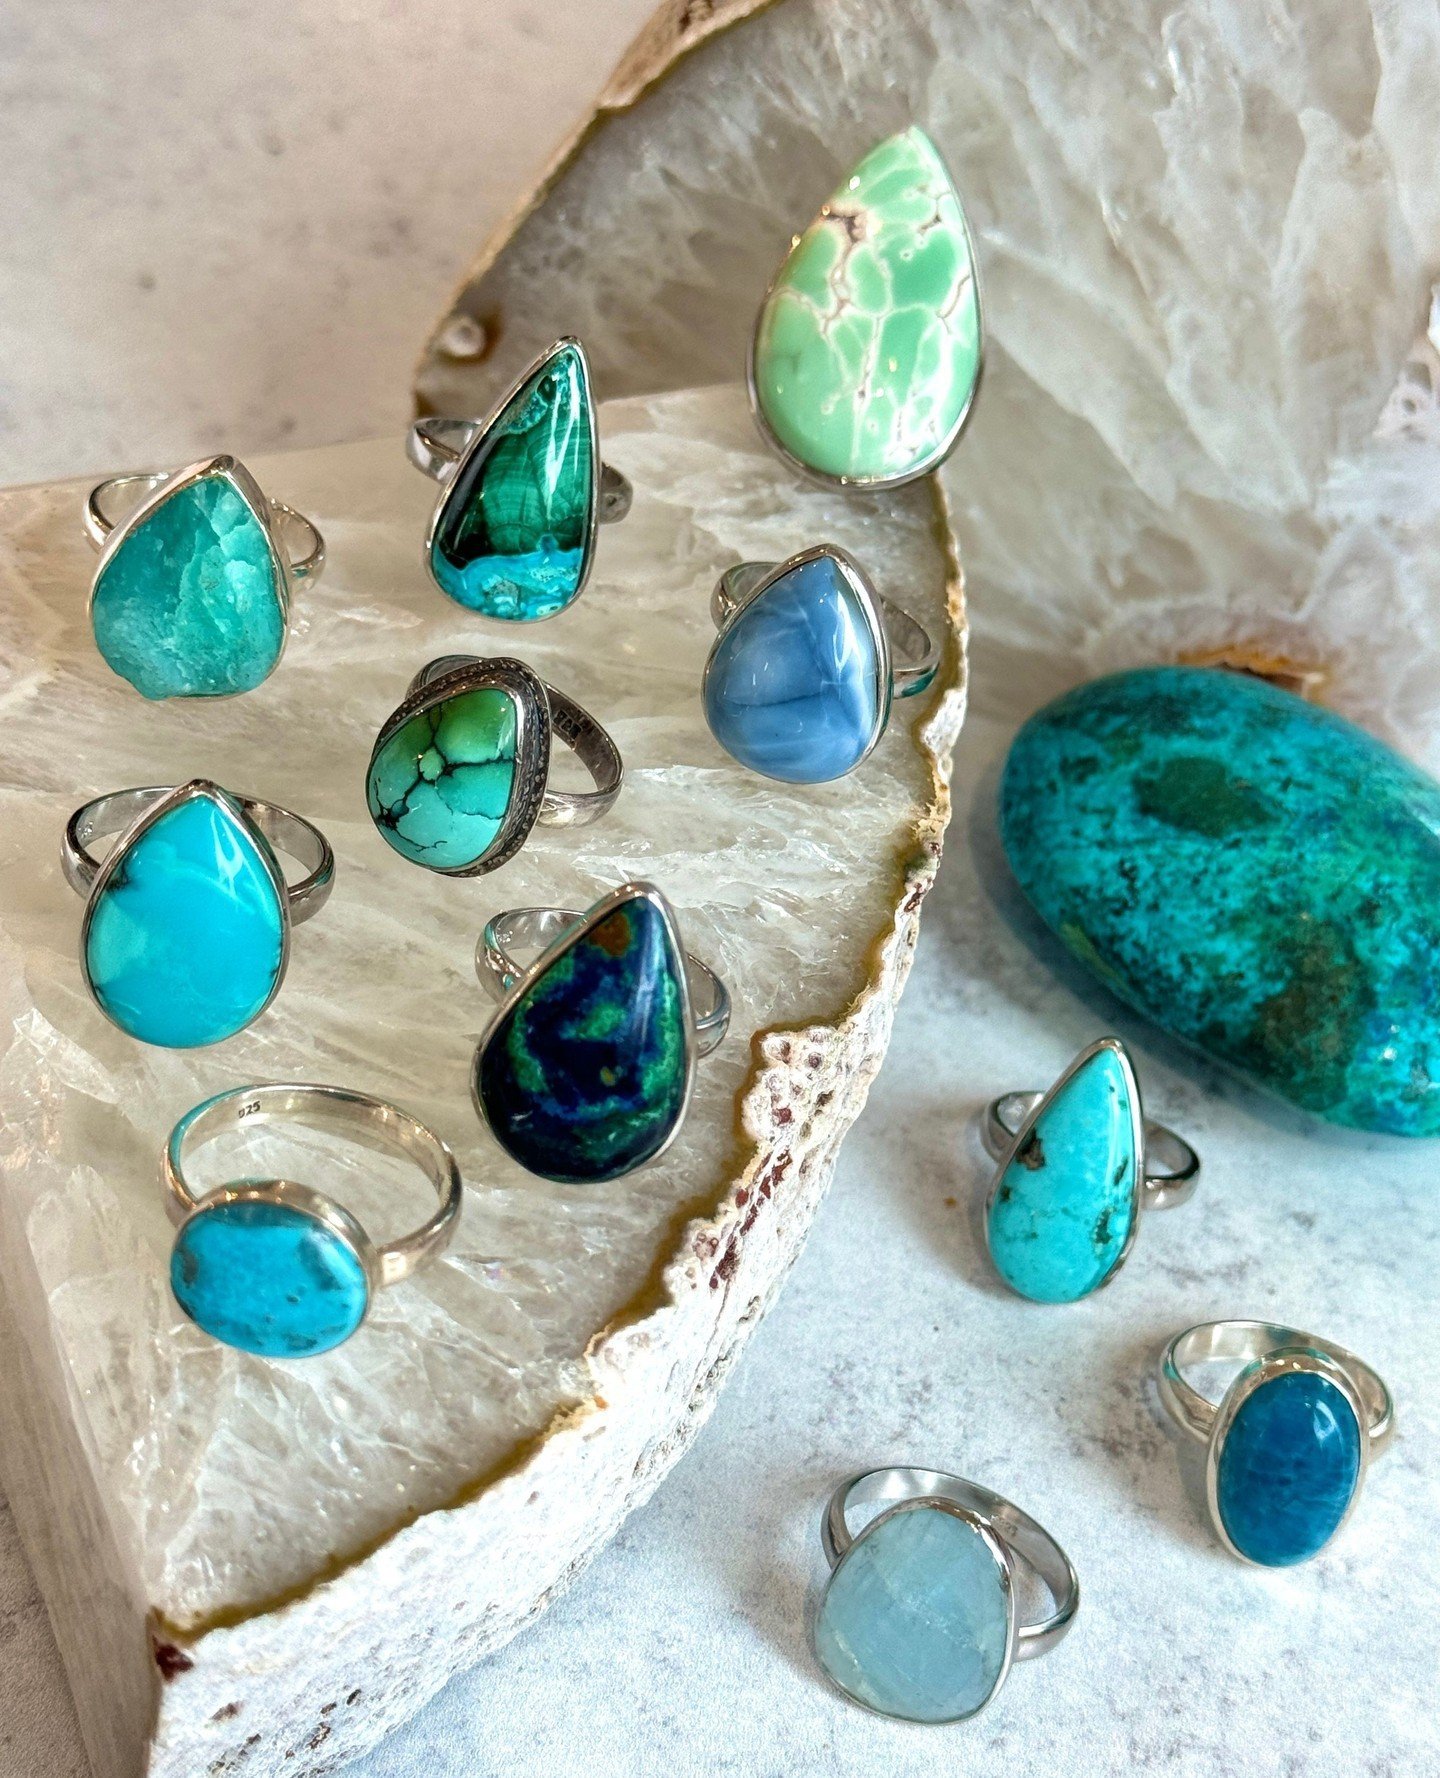 Join the celebration of exquisite RINGS! Here is a mere preview of our stunning new collection:⁠
⁠
- Larimar⁠
- Turquoise⁠
- Malachite⁠
- Aquamarine⁠
- Sapphire and more! ⁠
⁠
These magnificent, profound creations are truly breathtaking. ⁠
⁠
Reach out